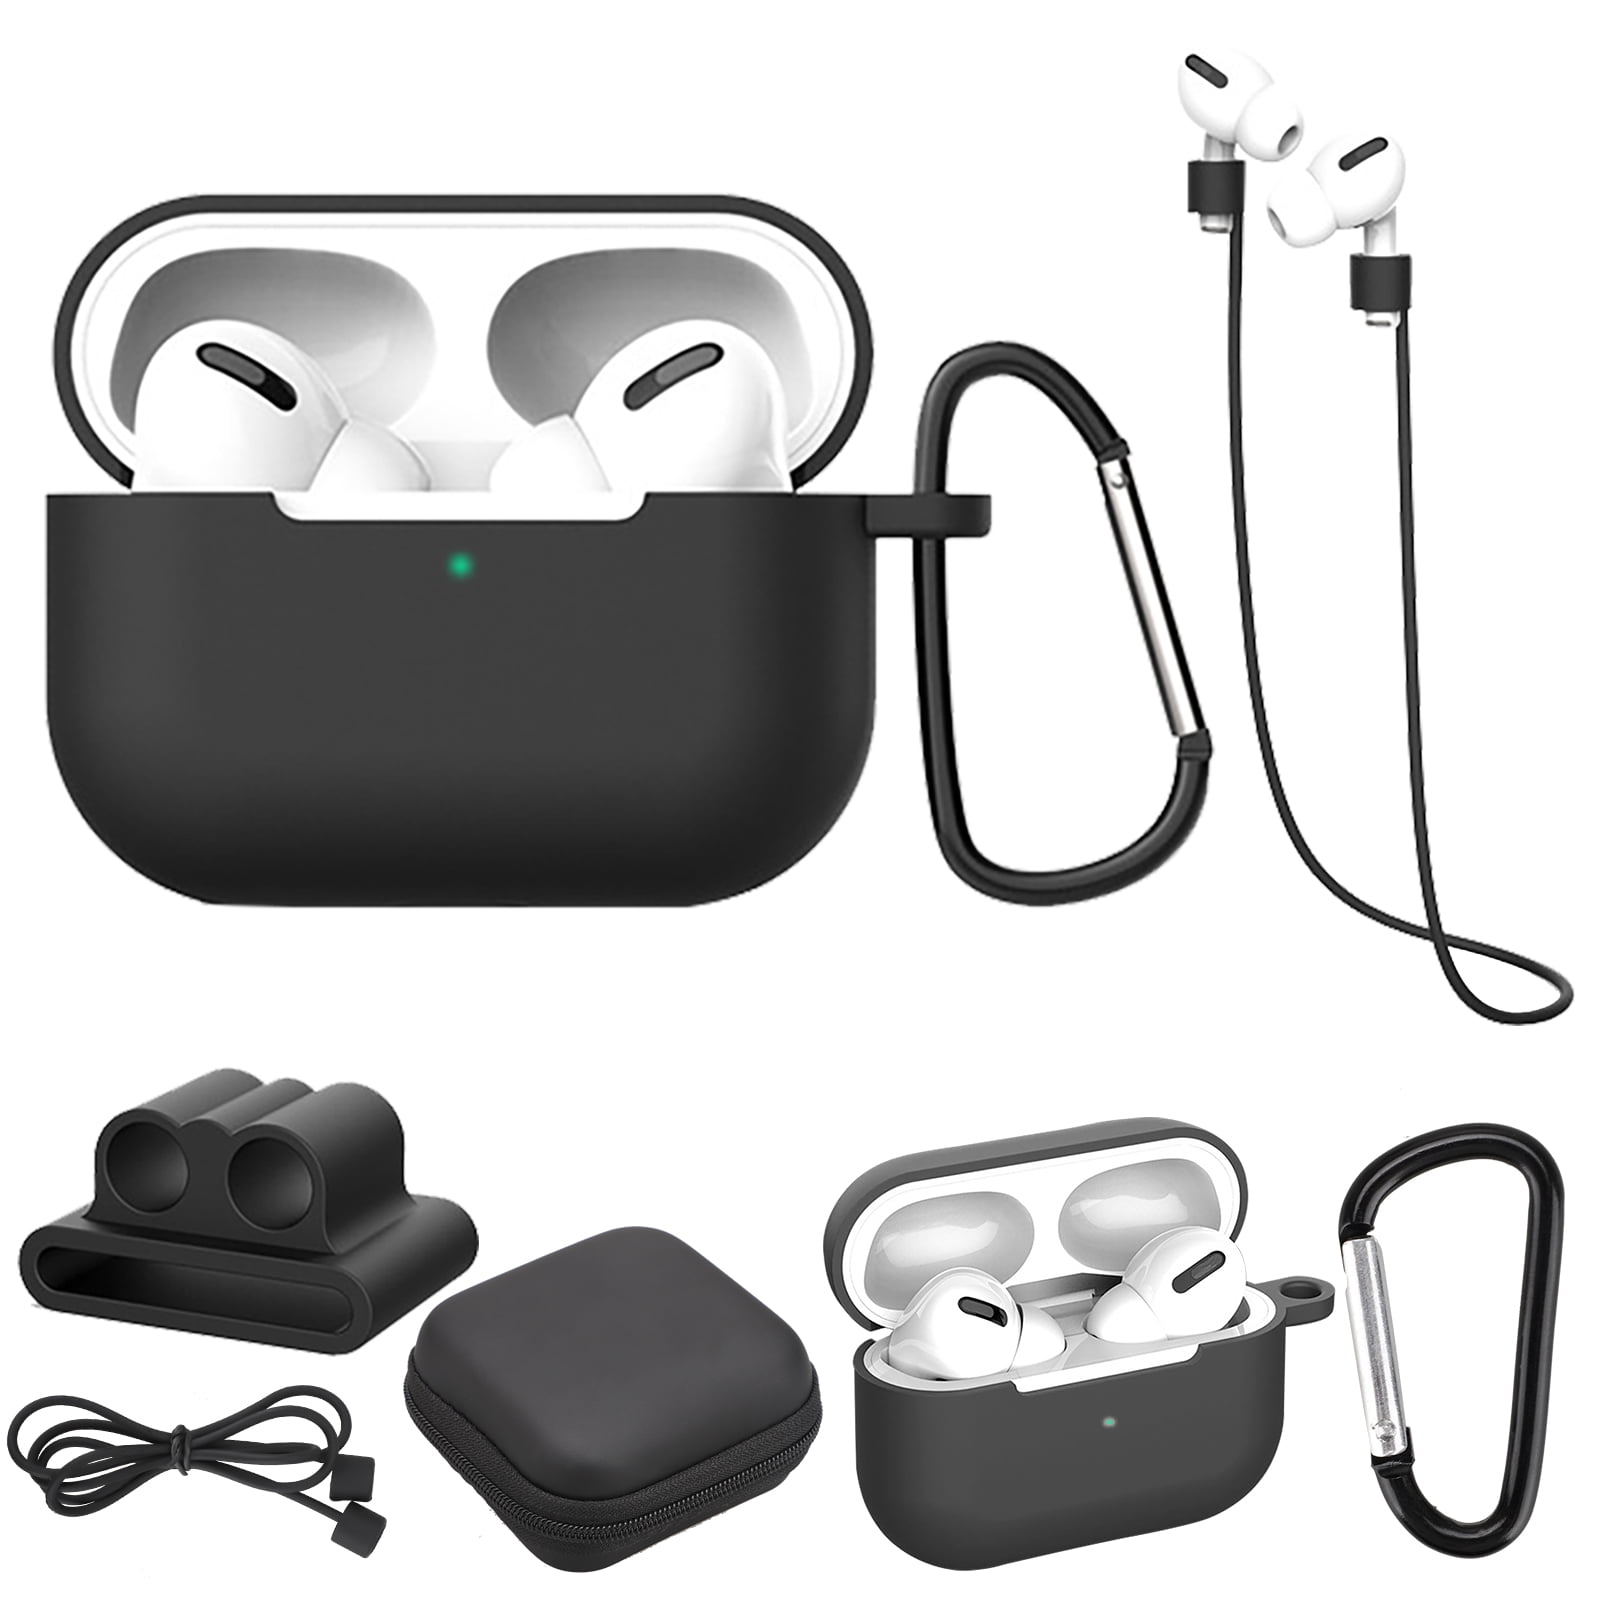 EEEKit 5 in 1 Accessories Set Compatible with Airpods Pro